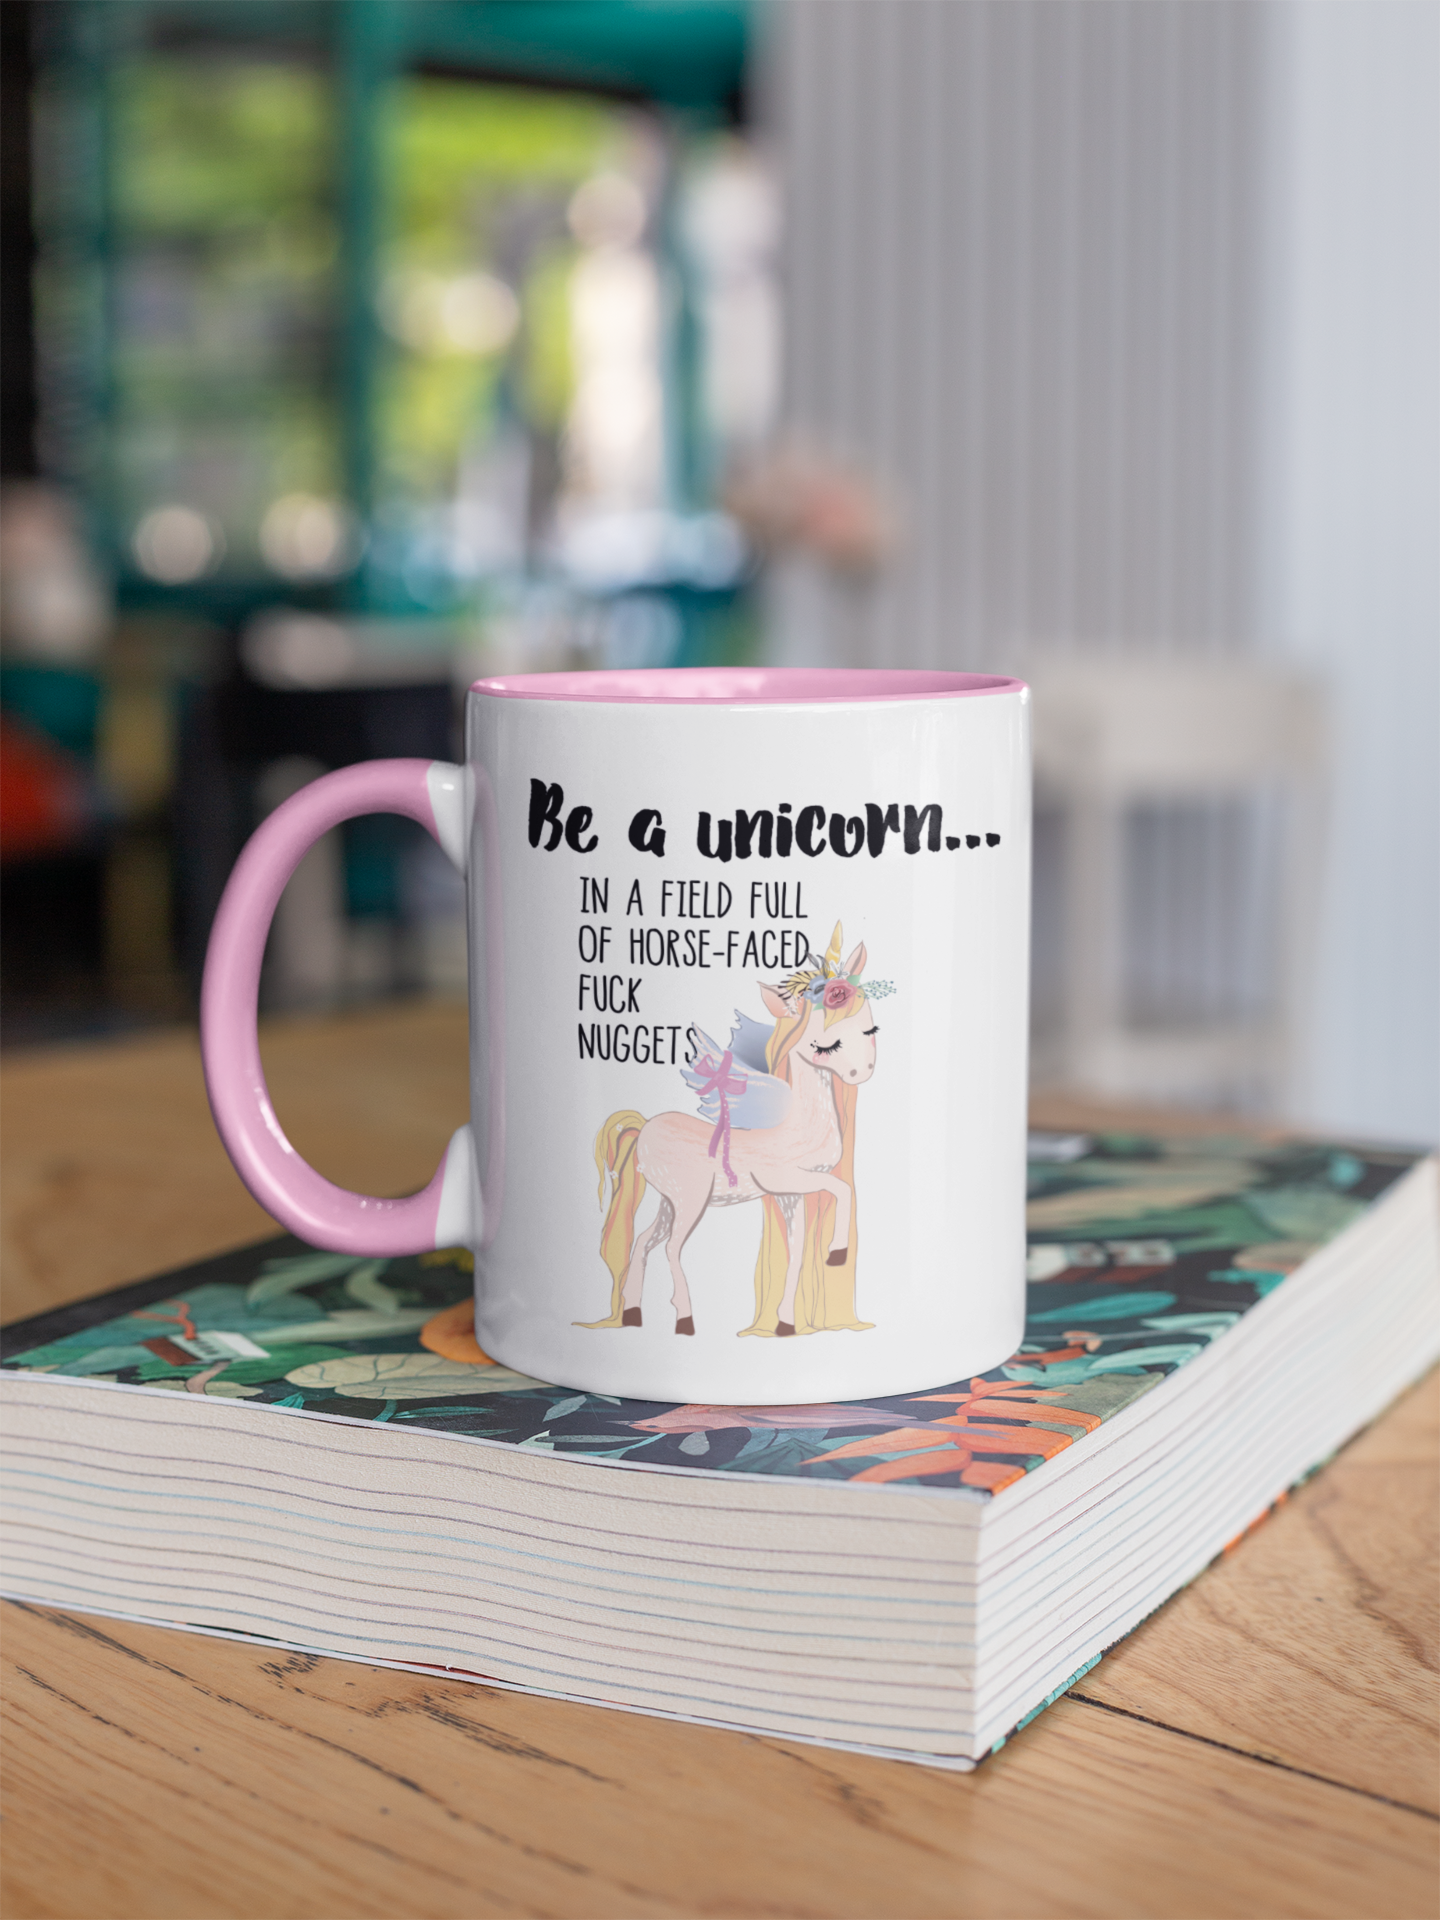 A white ceramic mug with a pink handle & inner featuring a funny quote be a unicorn... In a field full of horsefaced, fucknuggets Printed in black ink with a cute pastel coloured unicorn underneath.